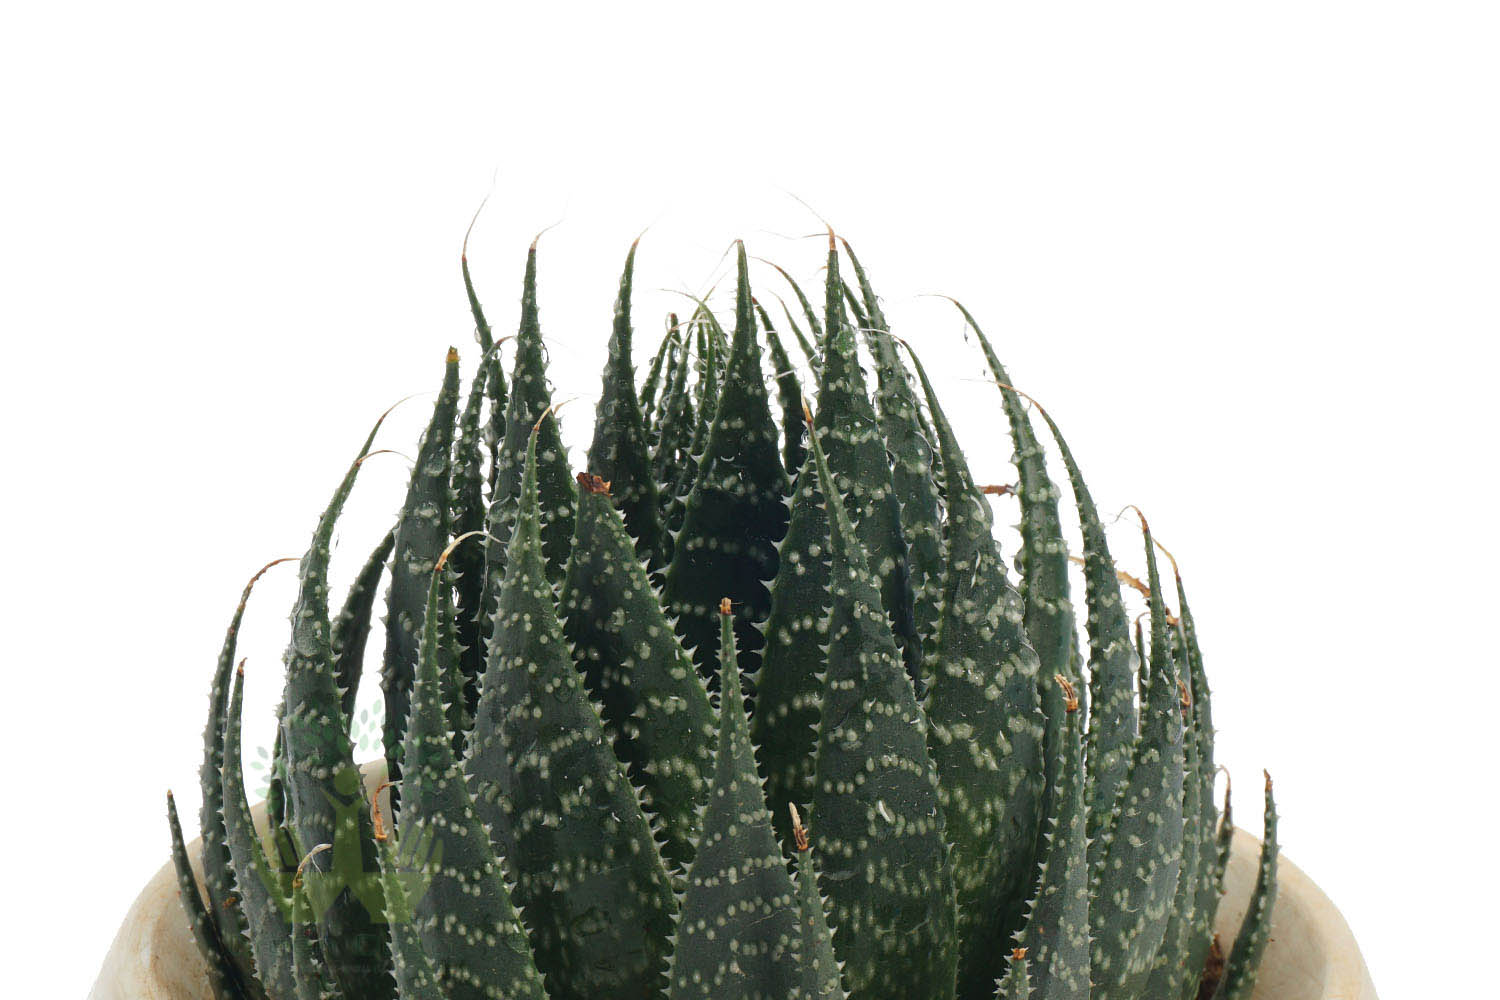 Buy Aloe Humilis Plants , White Pots and seeds in Delhi NCR by the best online nursery shop Greendecor.